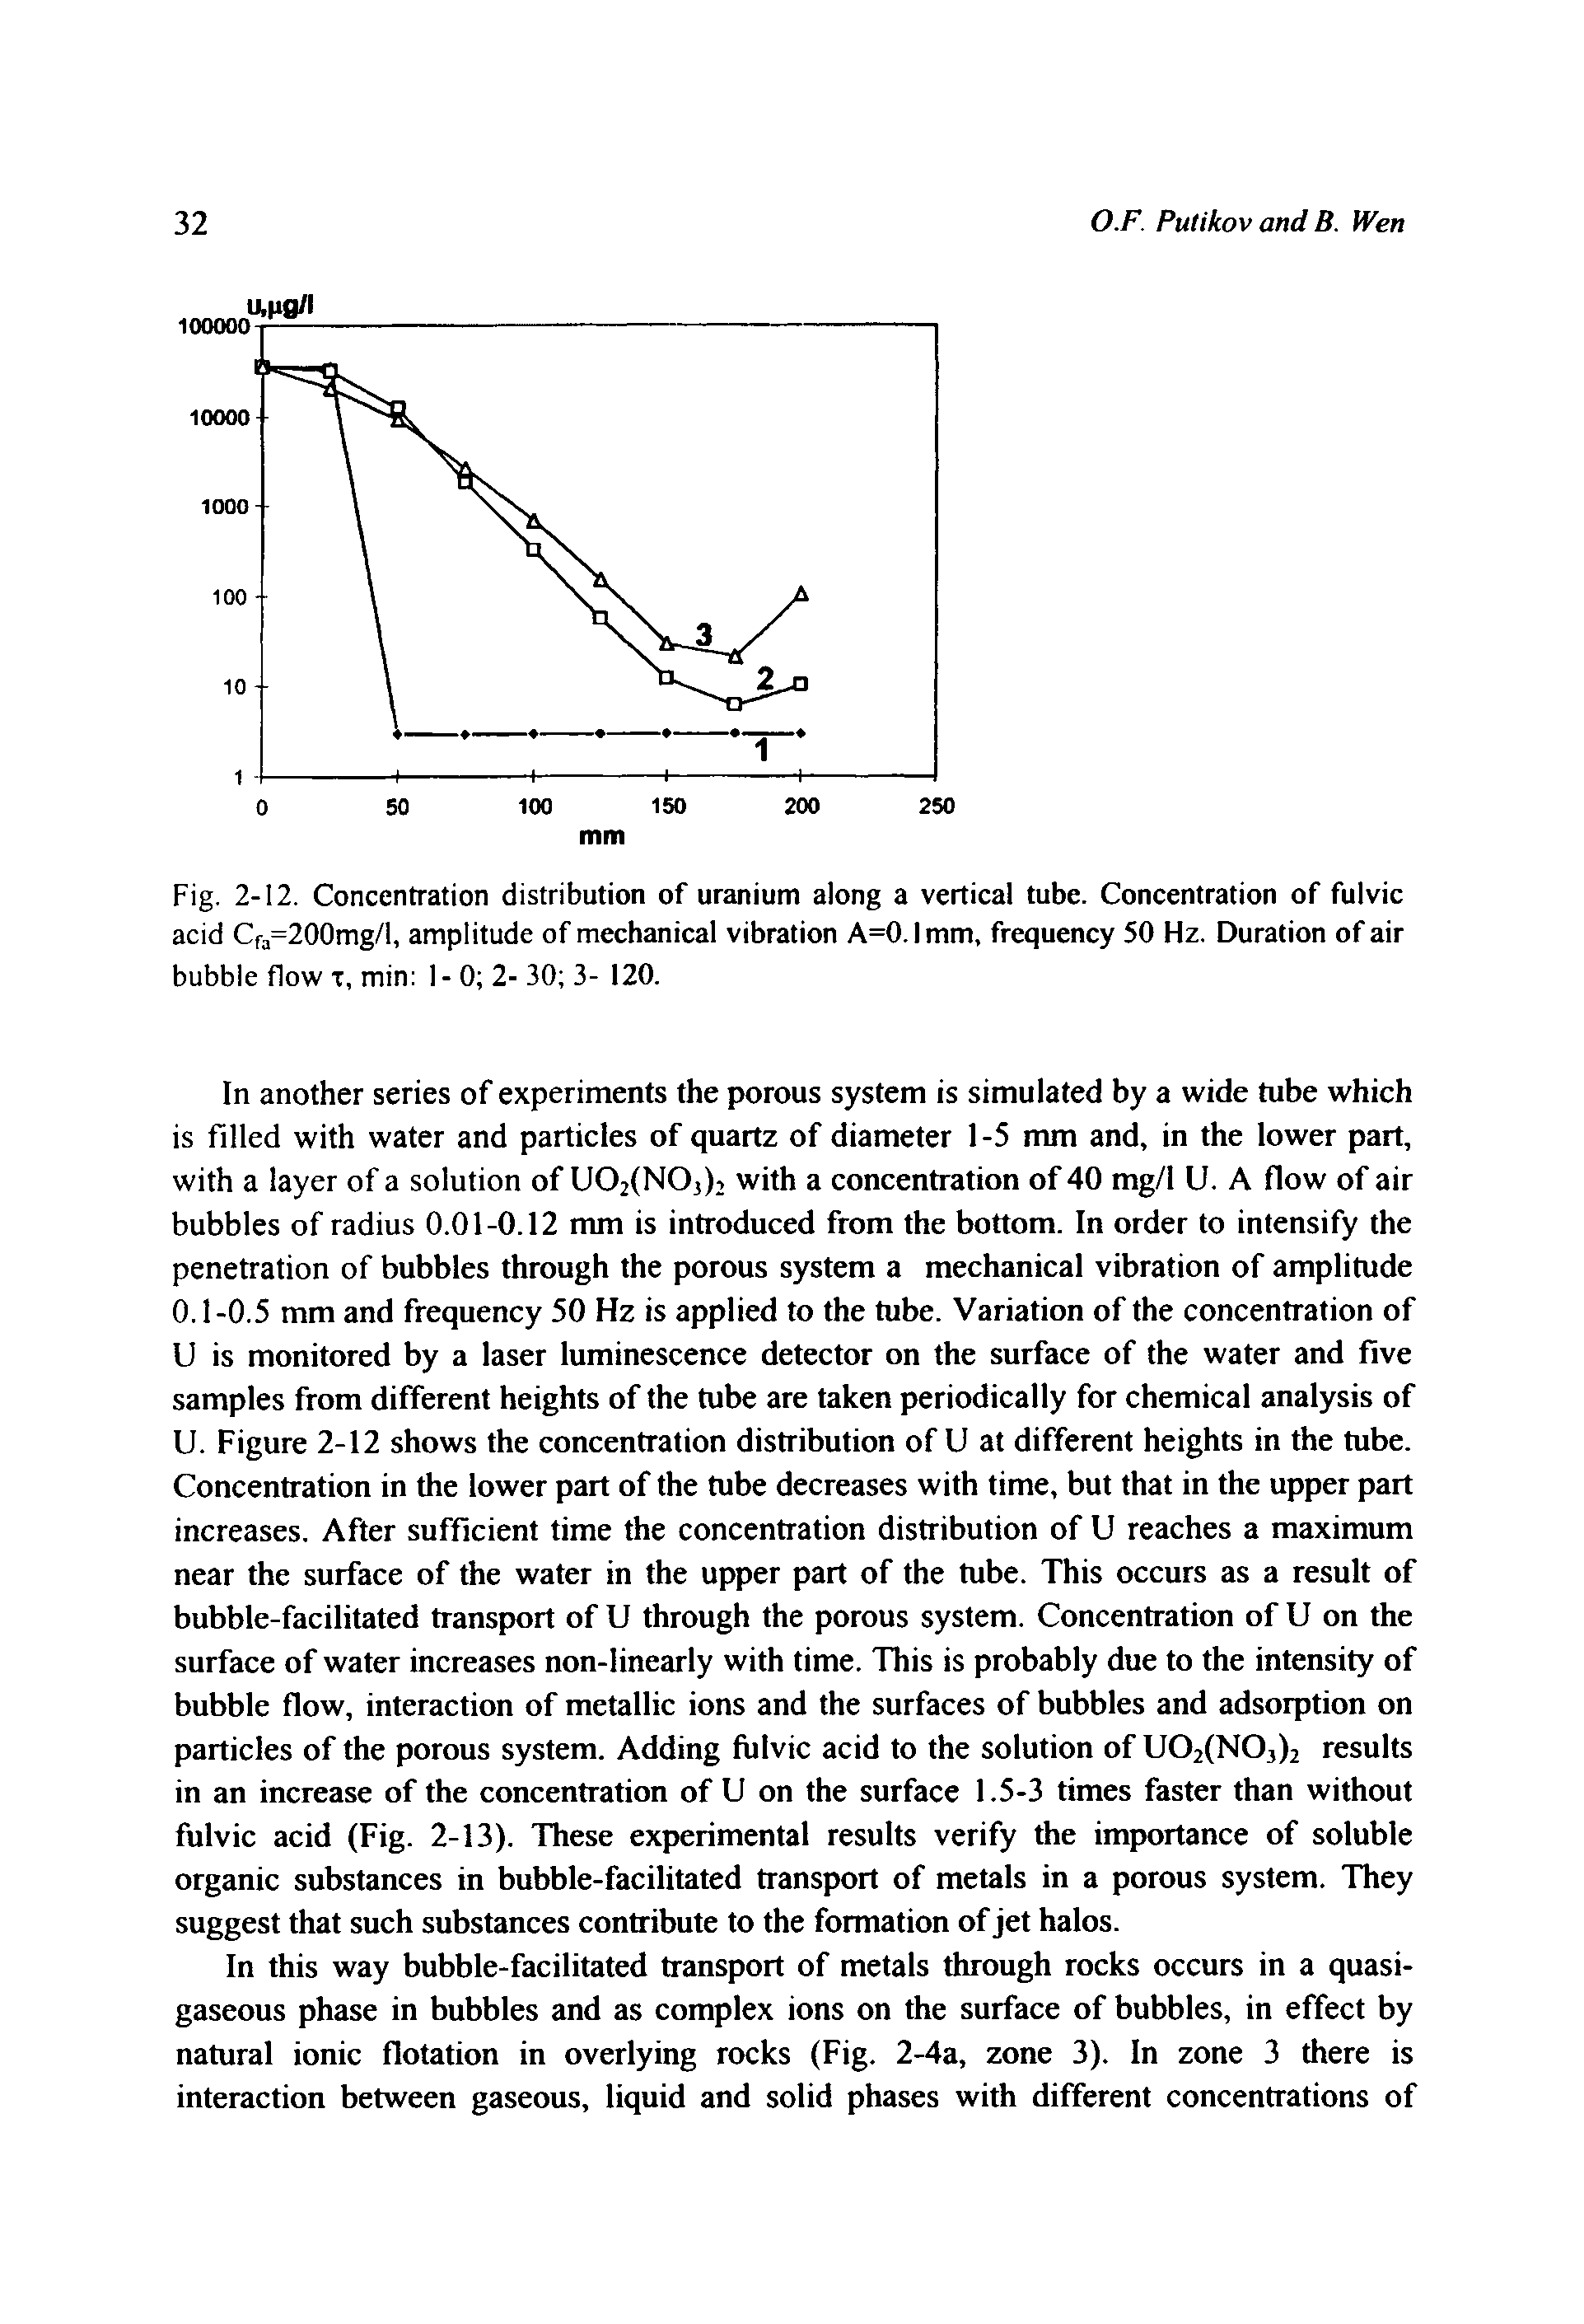 Fig. 2-12. Concentration distribution of uranium along a vertical tube. Concentration of fulvic acid Cfa=200mg/1, amplitude of mechanical vibration A=0.lmm, frequency 50 Hz. Duration of air bubble flow x, min 1- 0 2- 30 3- 120.